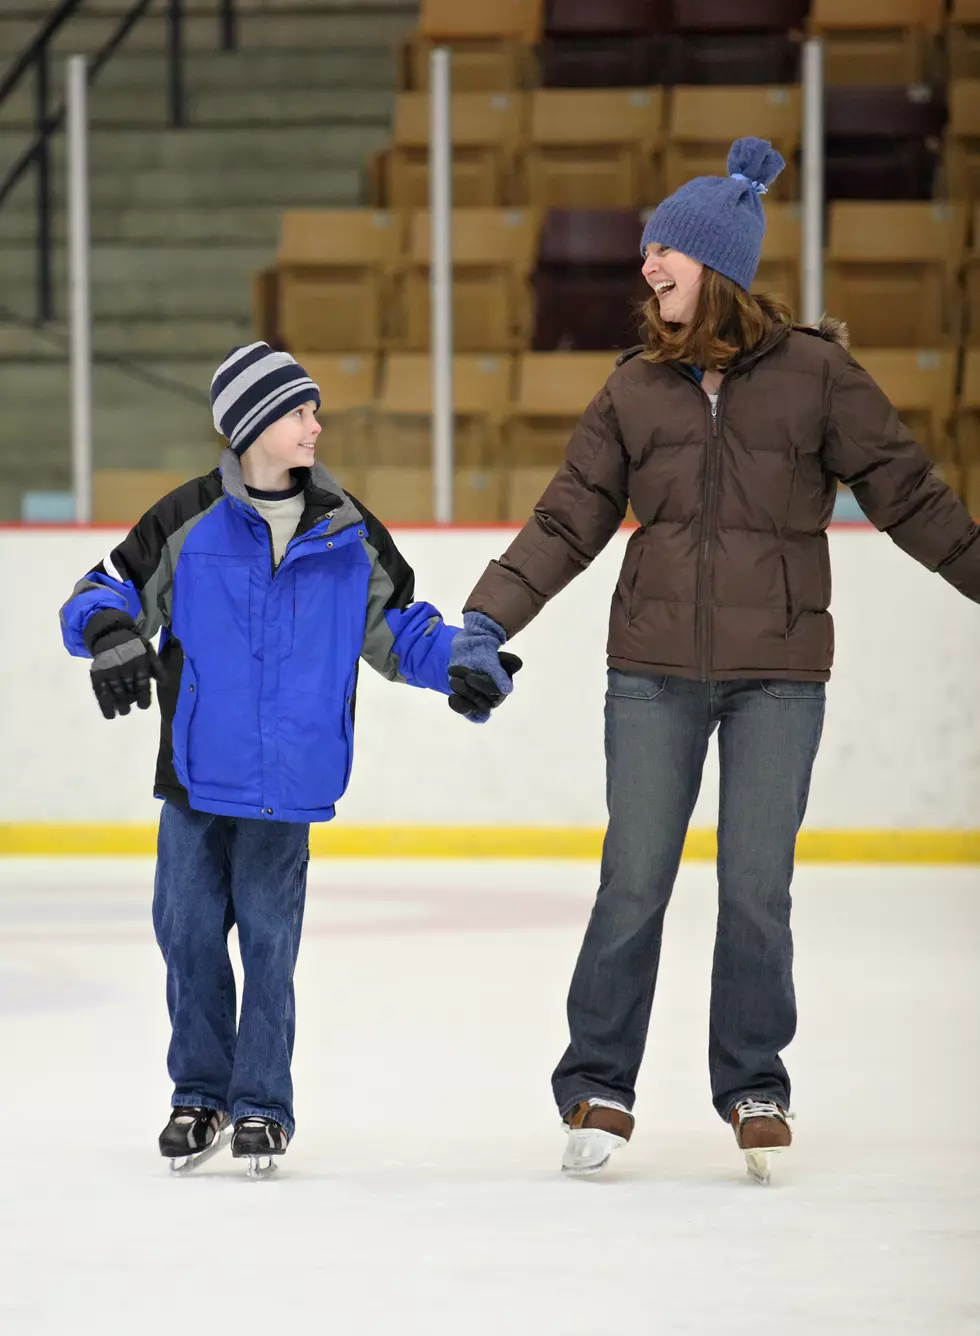 Duluth Closes Bayfront Park Ice Rink For the Rest of the Winter Season